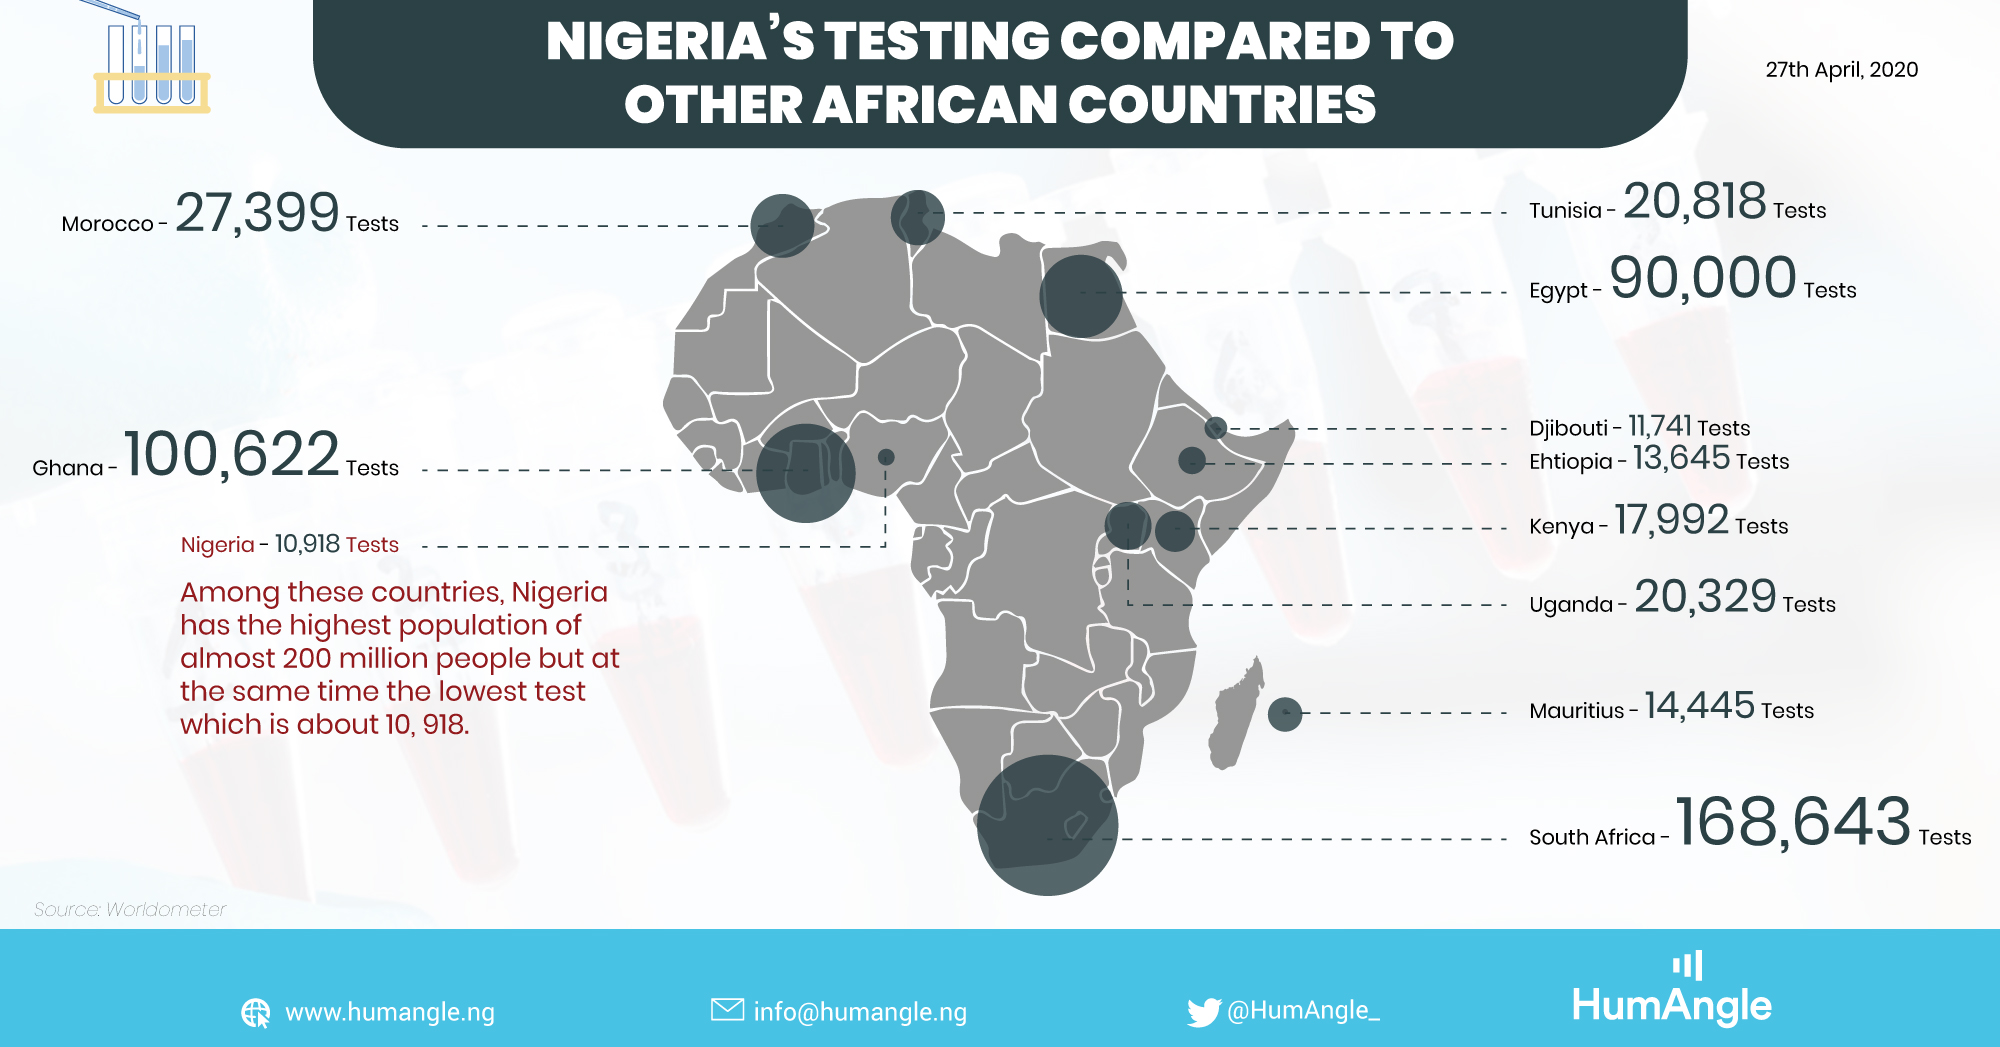 Nigeria’s testing compared to other African countries